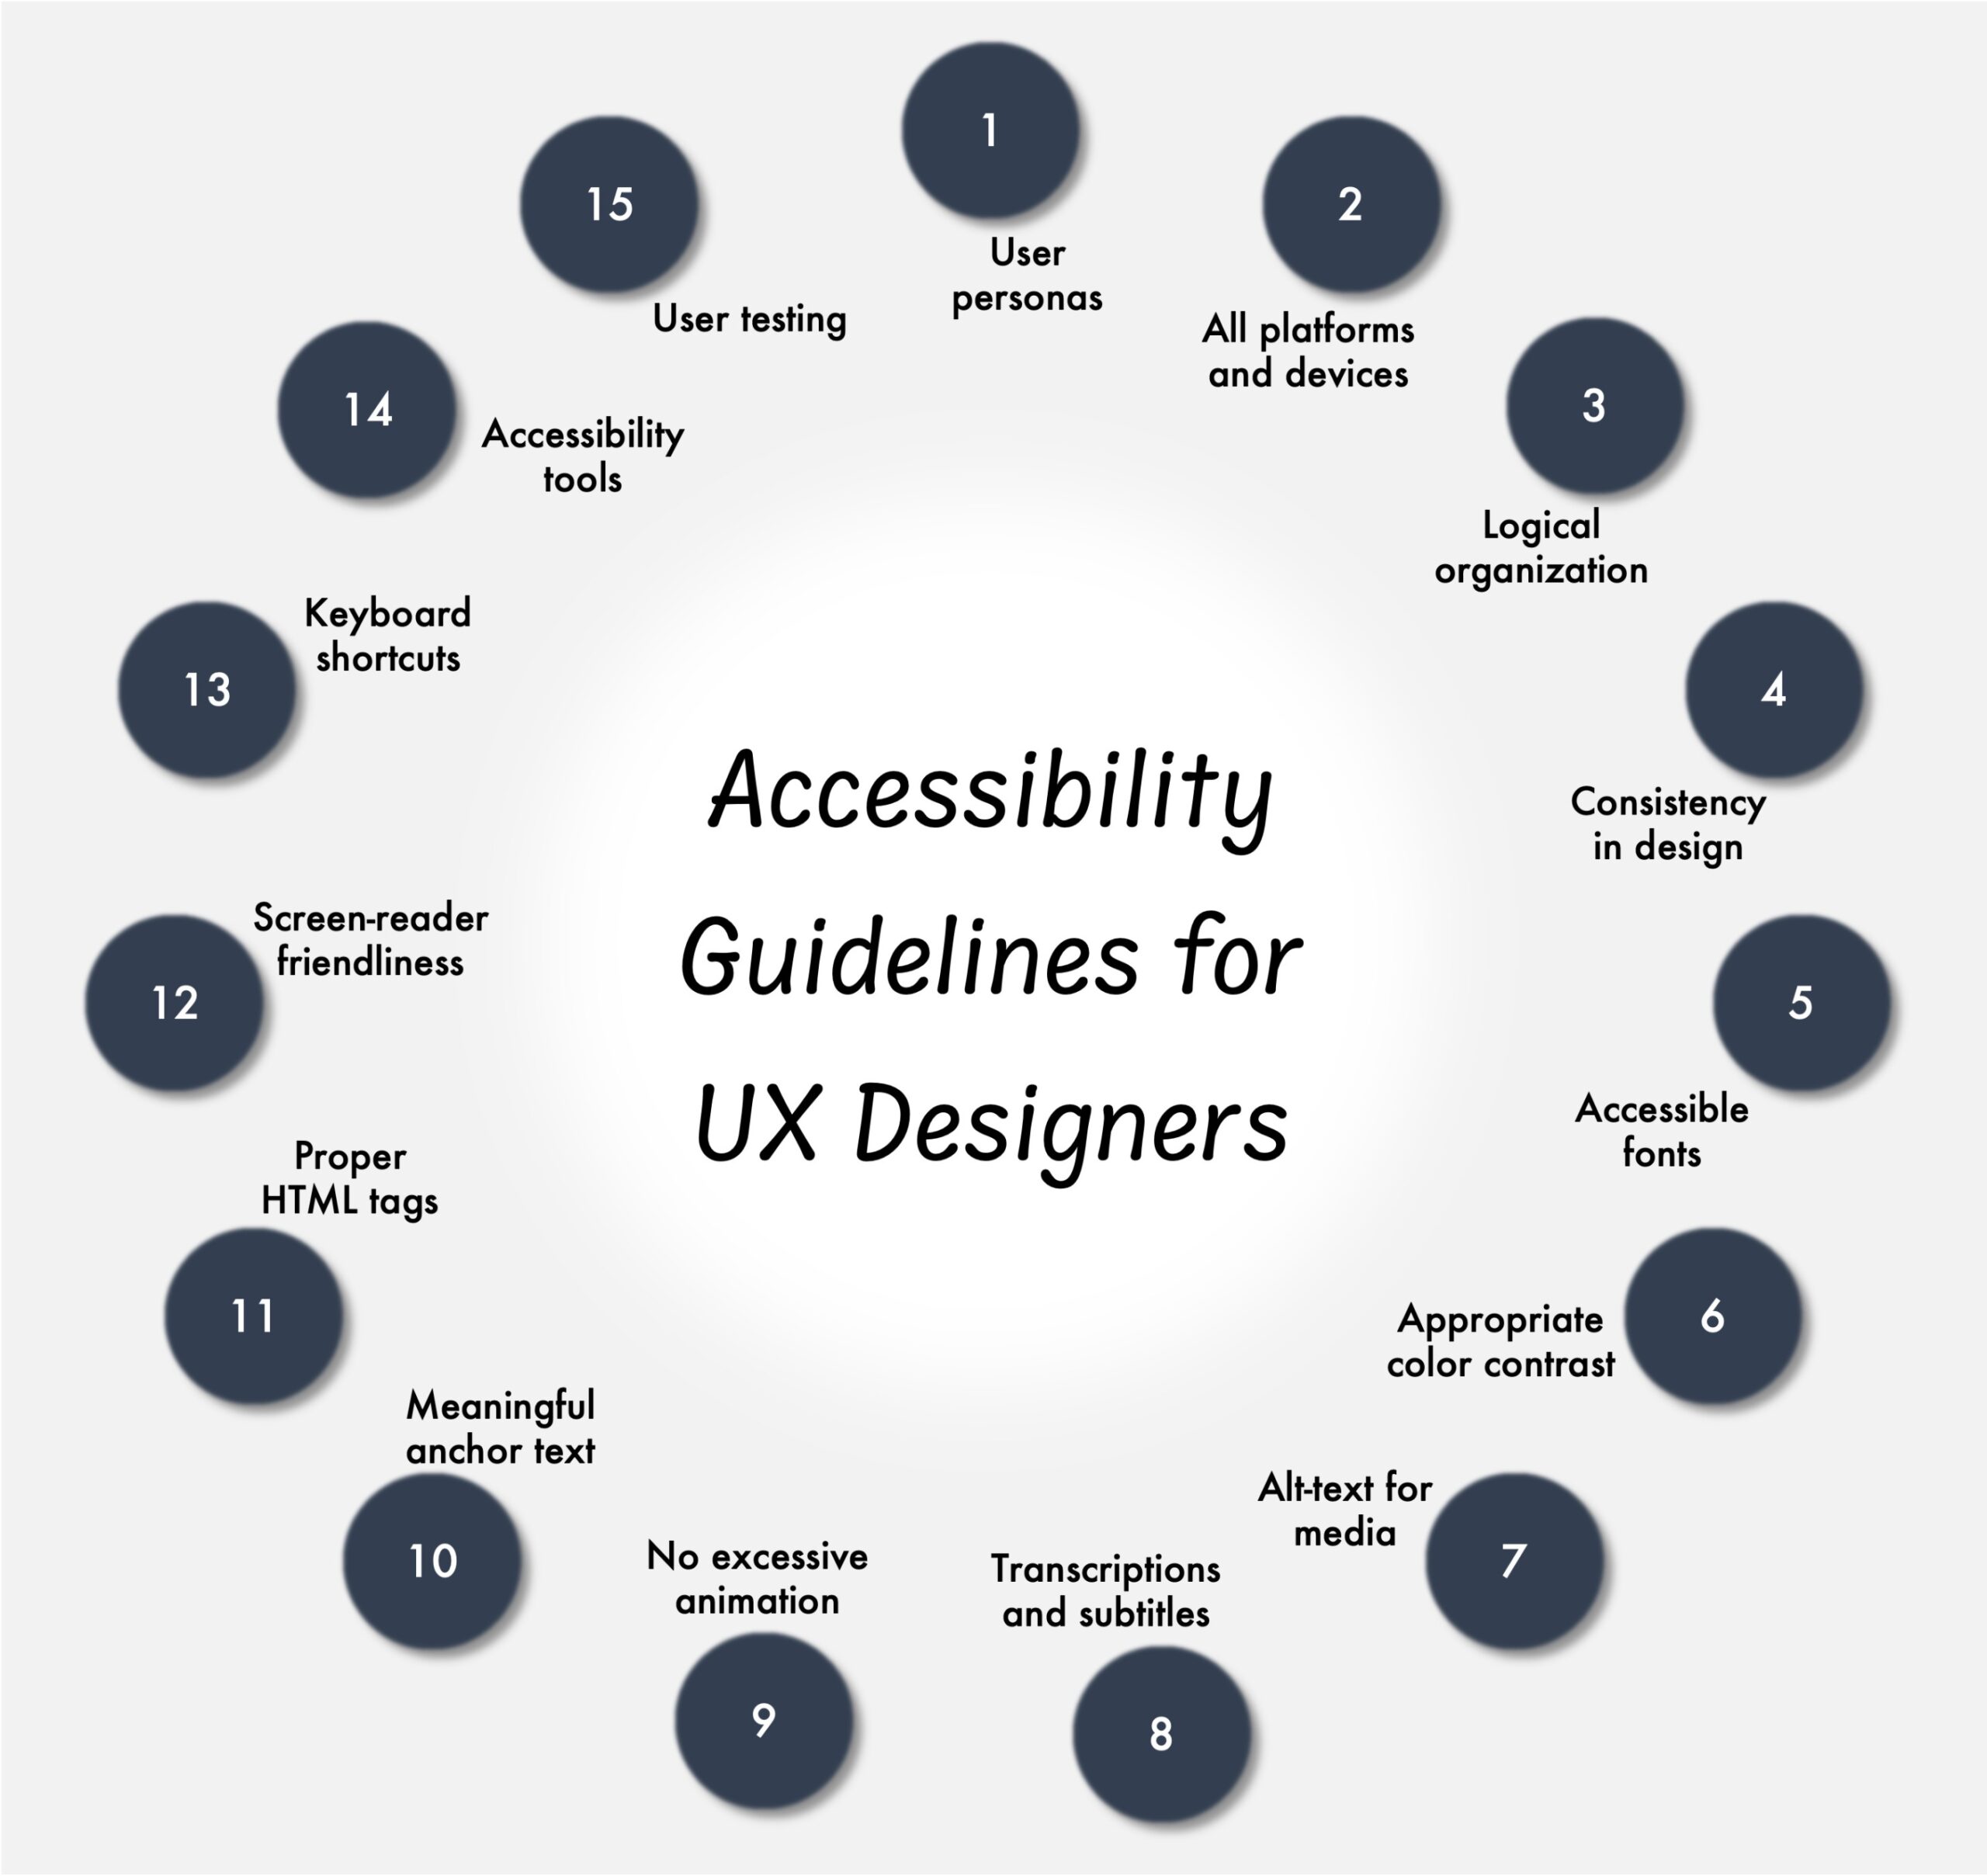 accessibility and design Bulan 4 Accessibility in UX Design: Guidelines and Key Principles